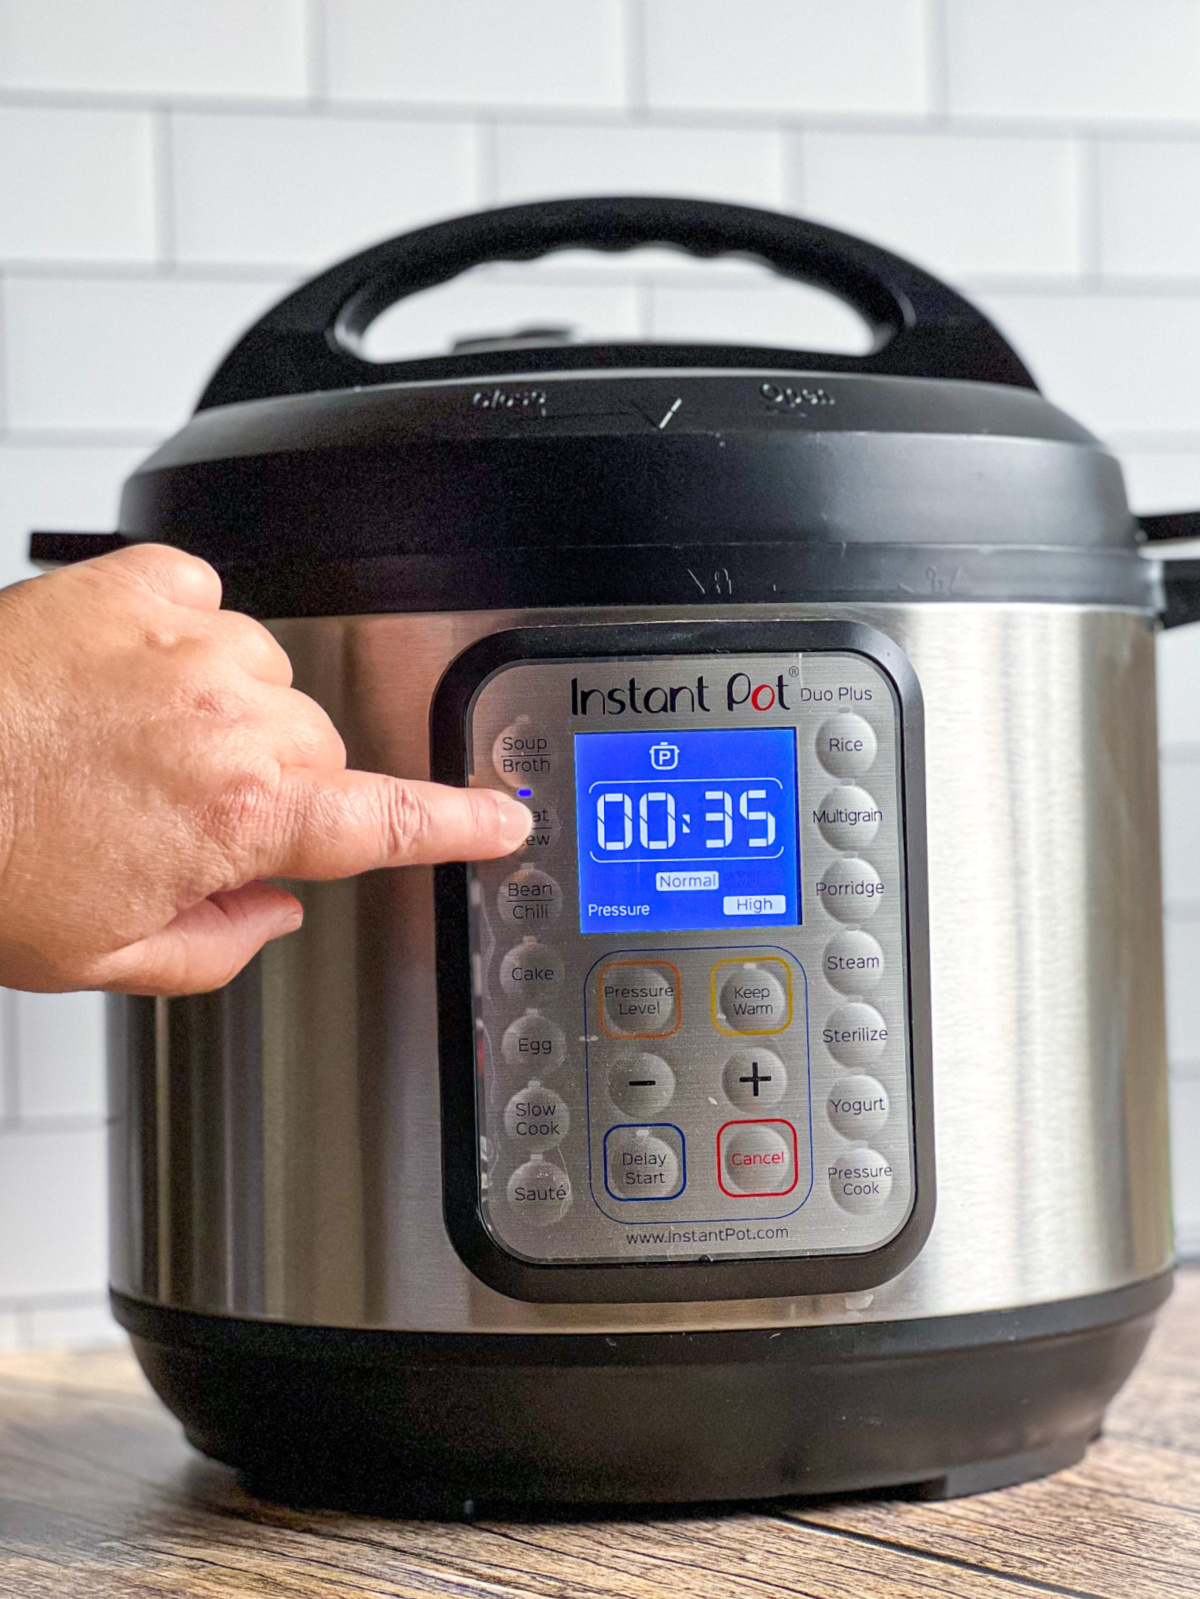 setting the Instant Pot to cook pollo pibil